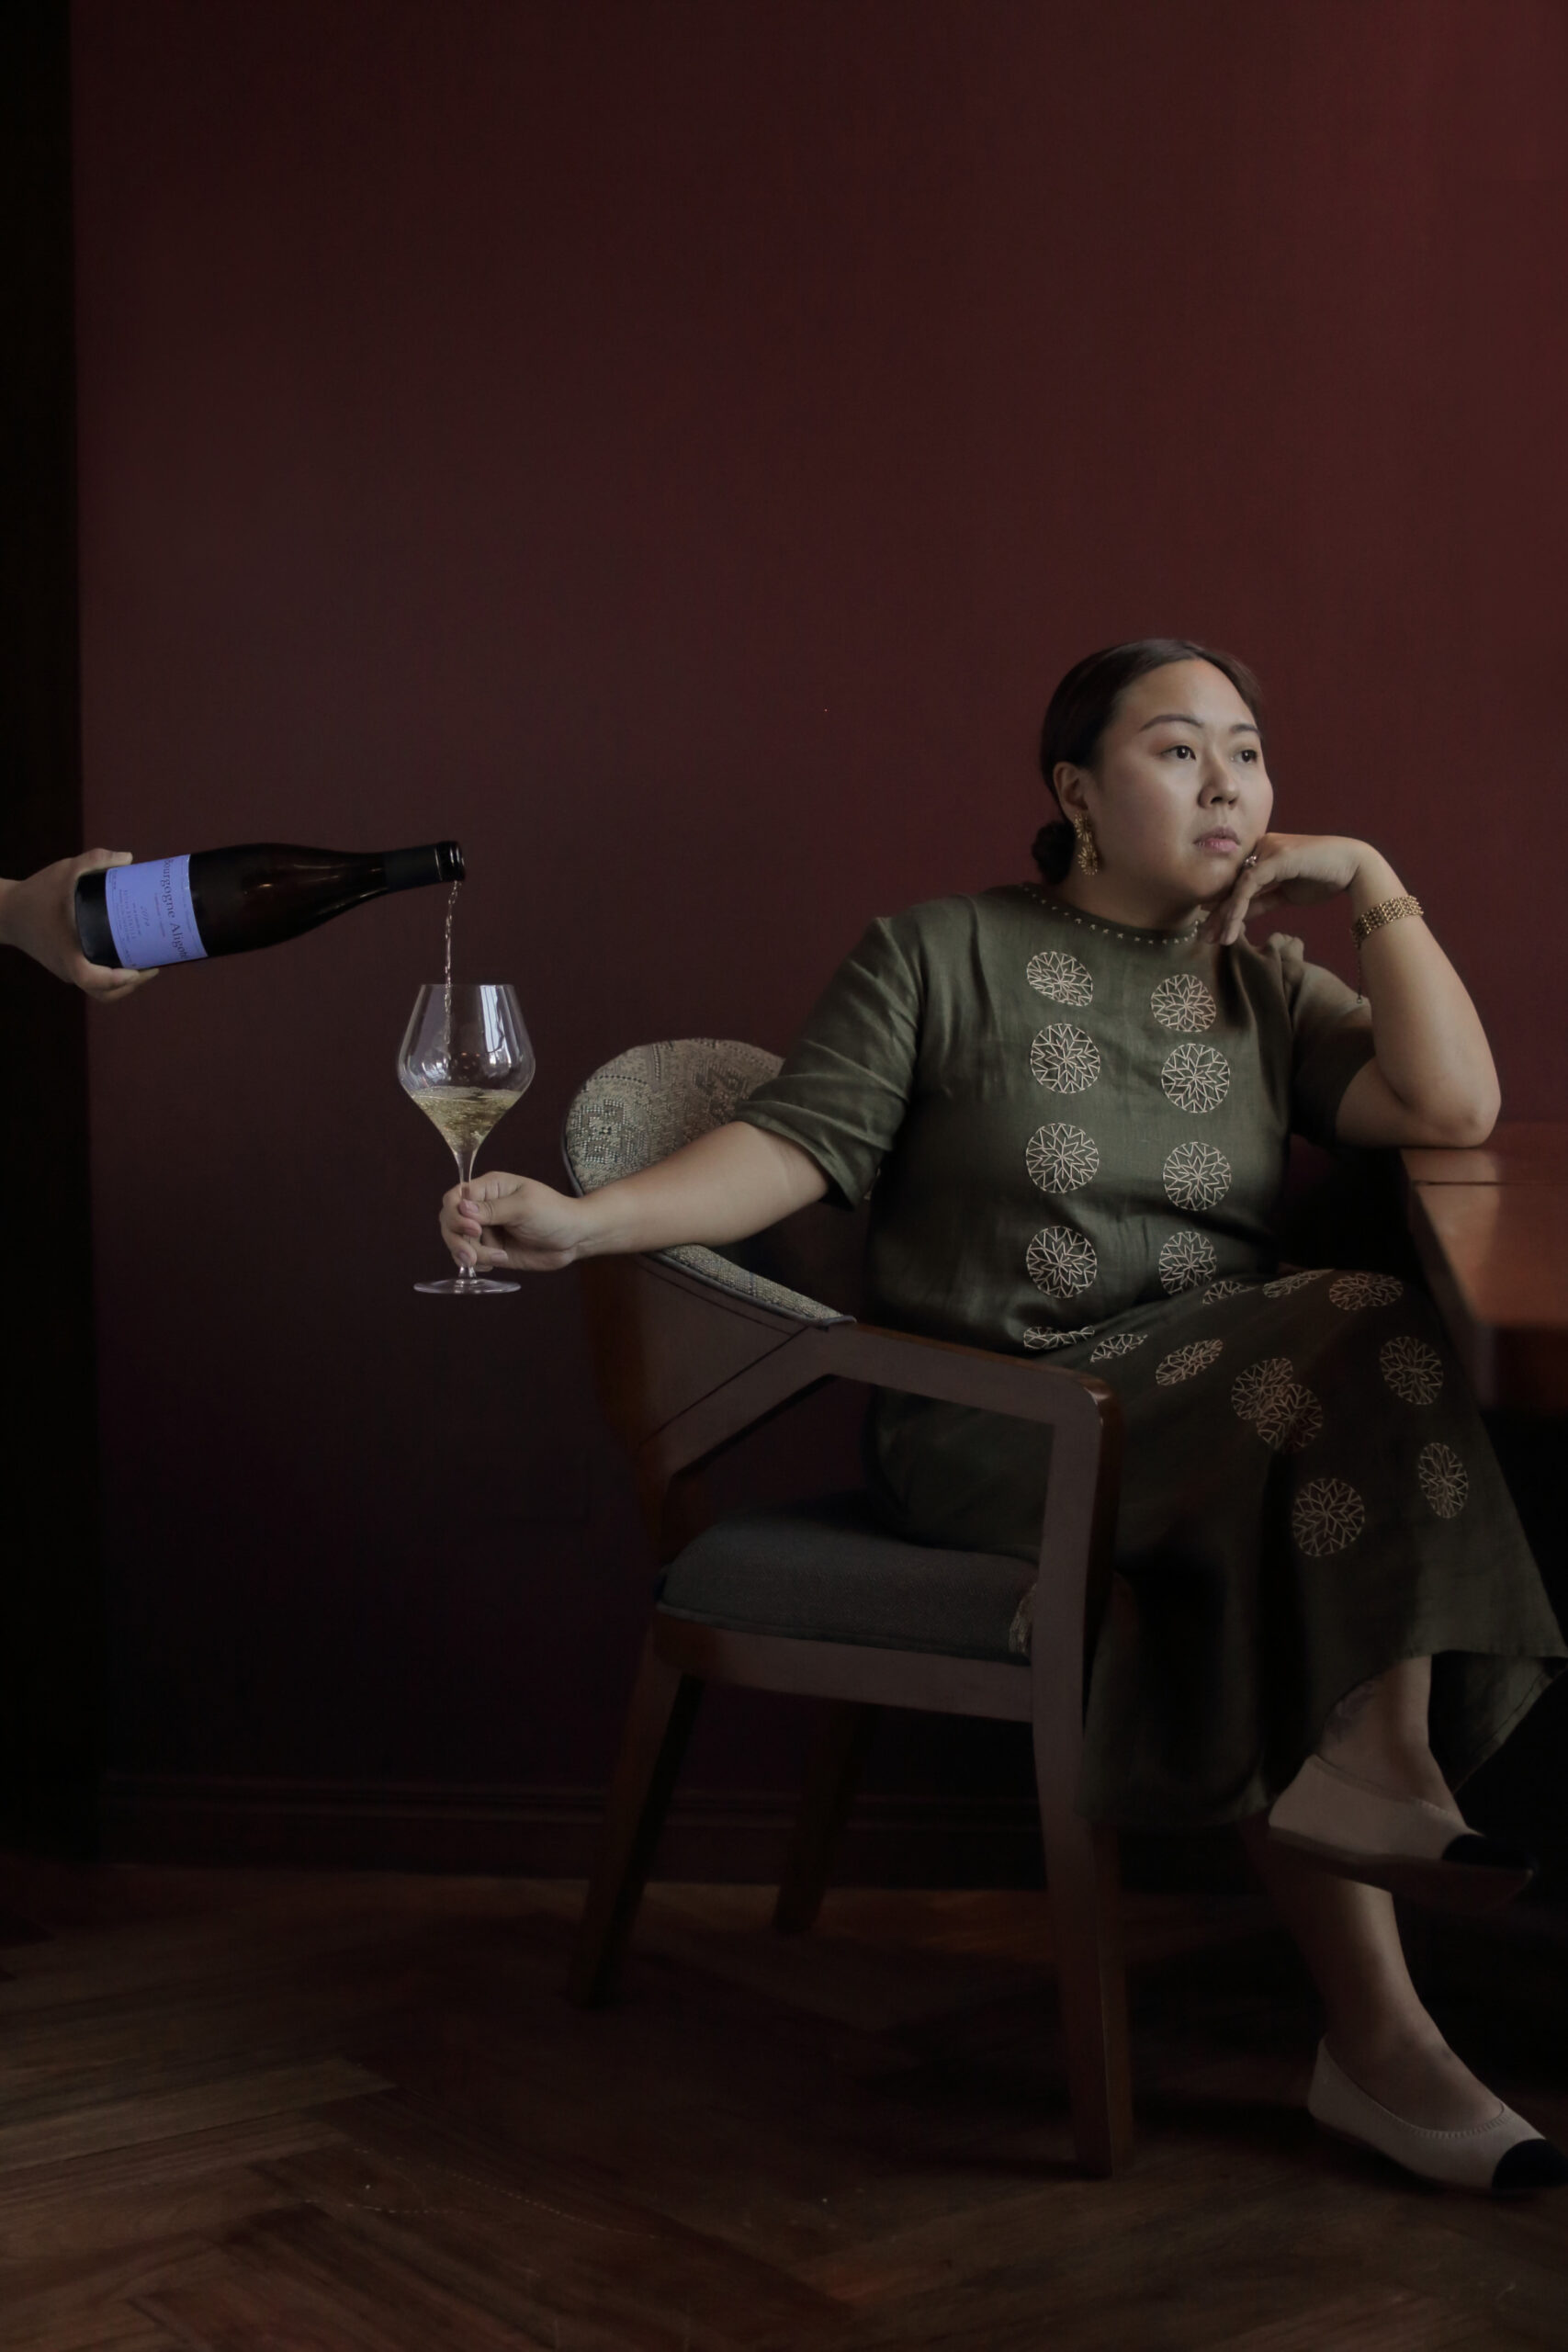 Operations manager and sommelier Erin Ganuelas